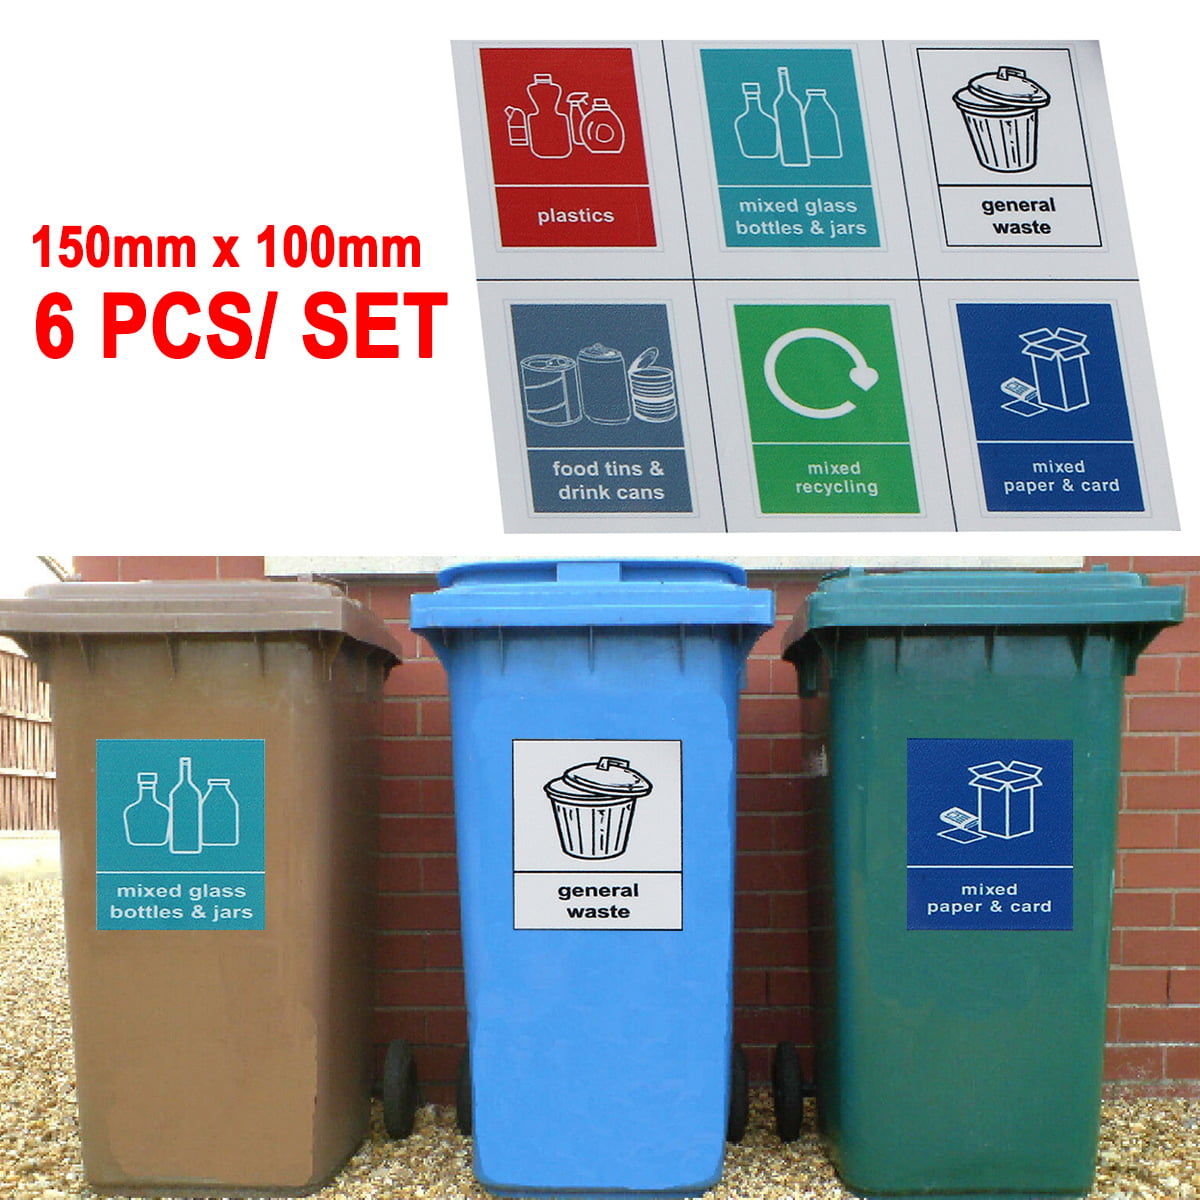 3 x RECYCLING WHEELIE BIN VINYL STICKERS LABELS RECYCLING BOTTLES CANS PLASTIC 